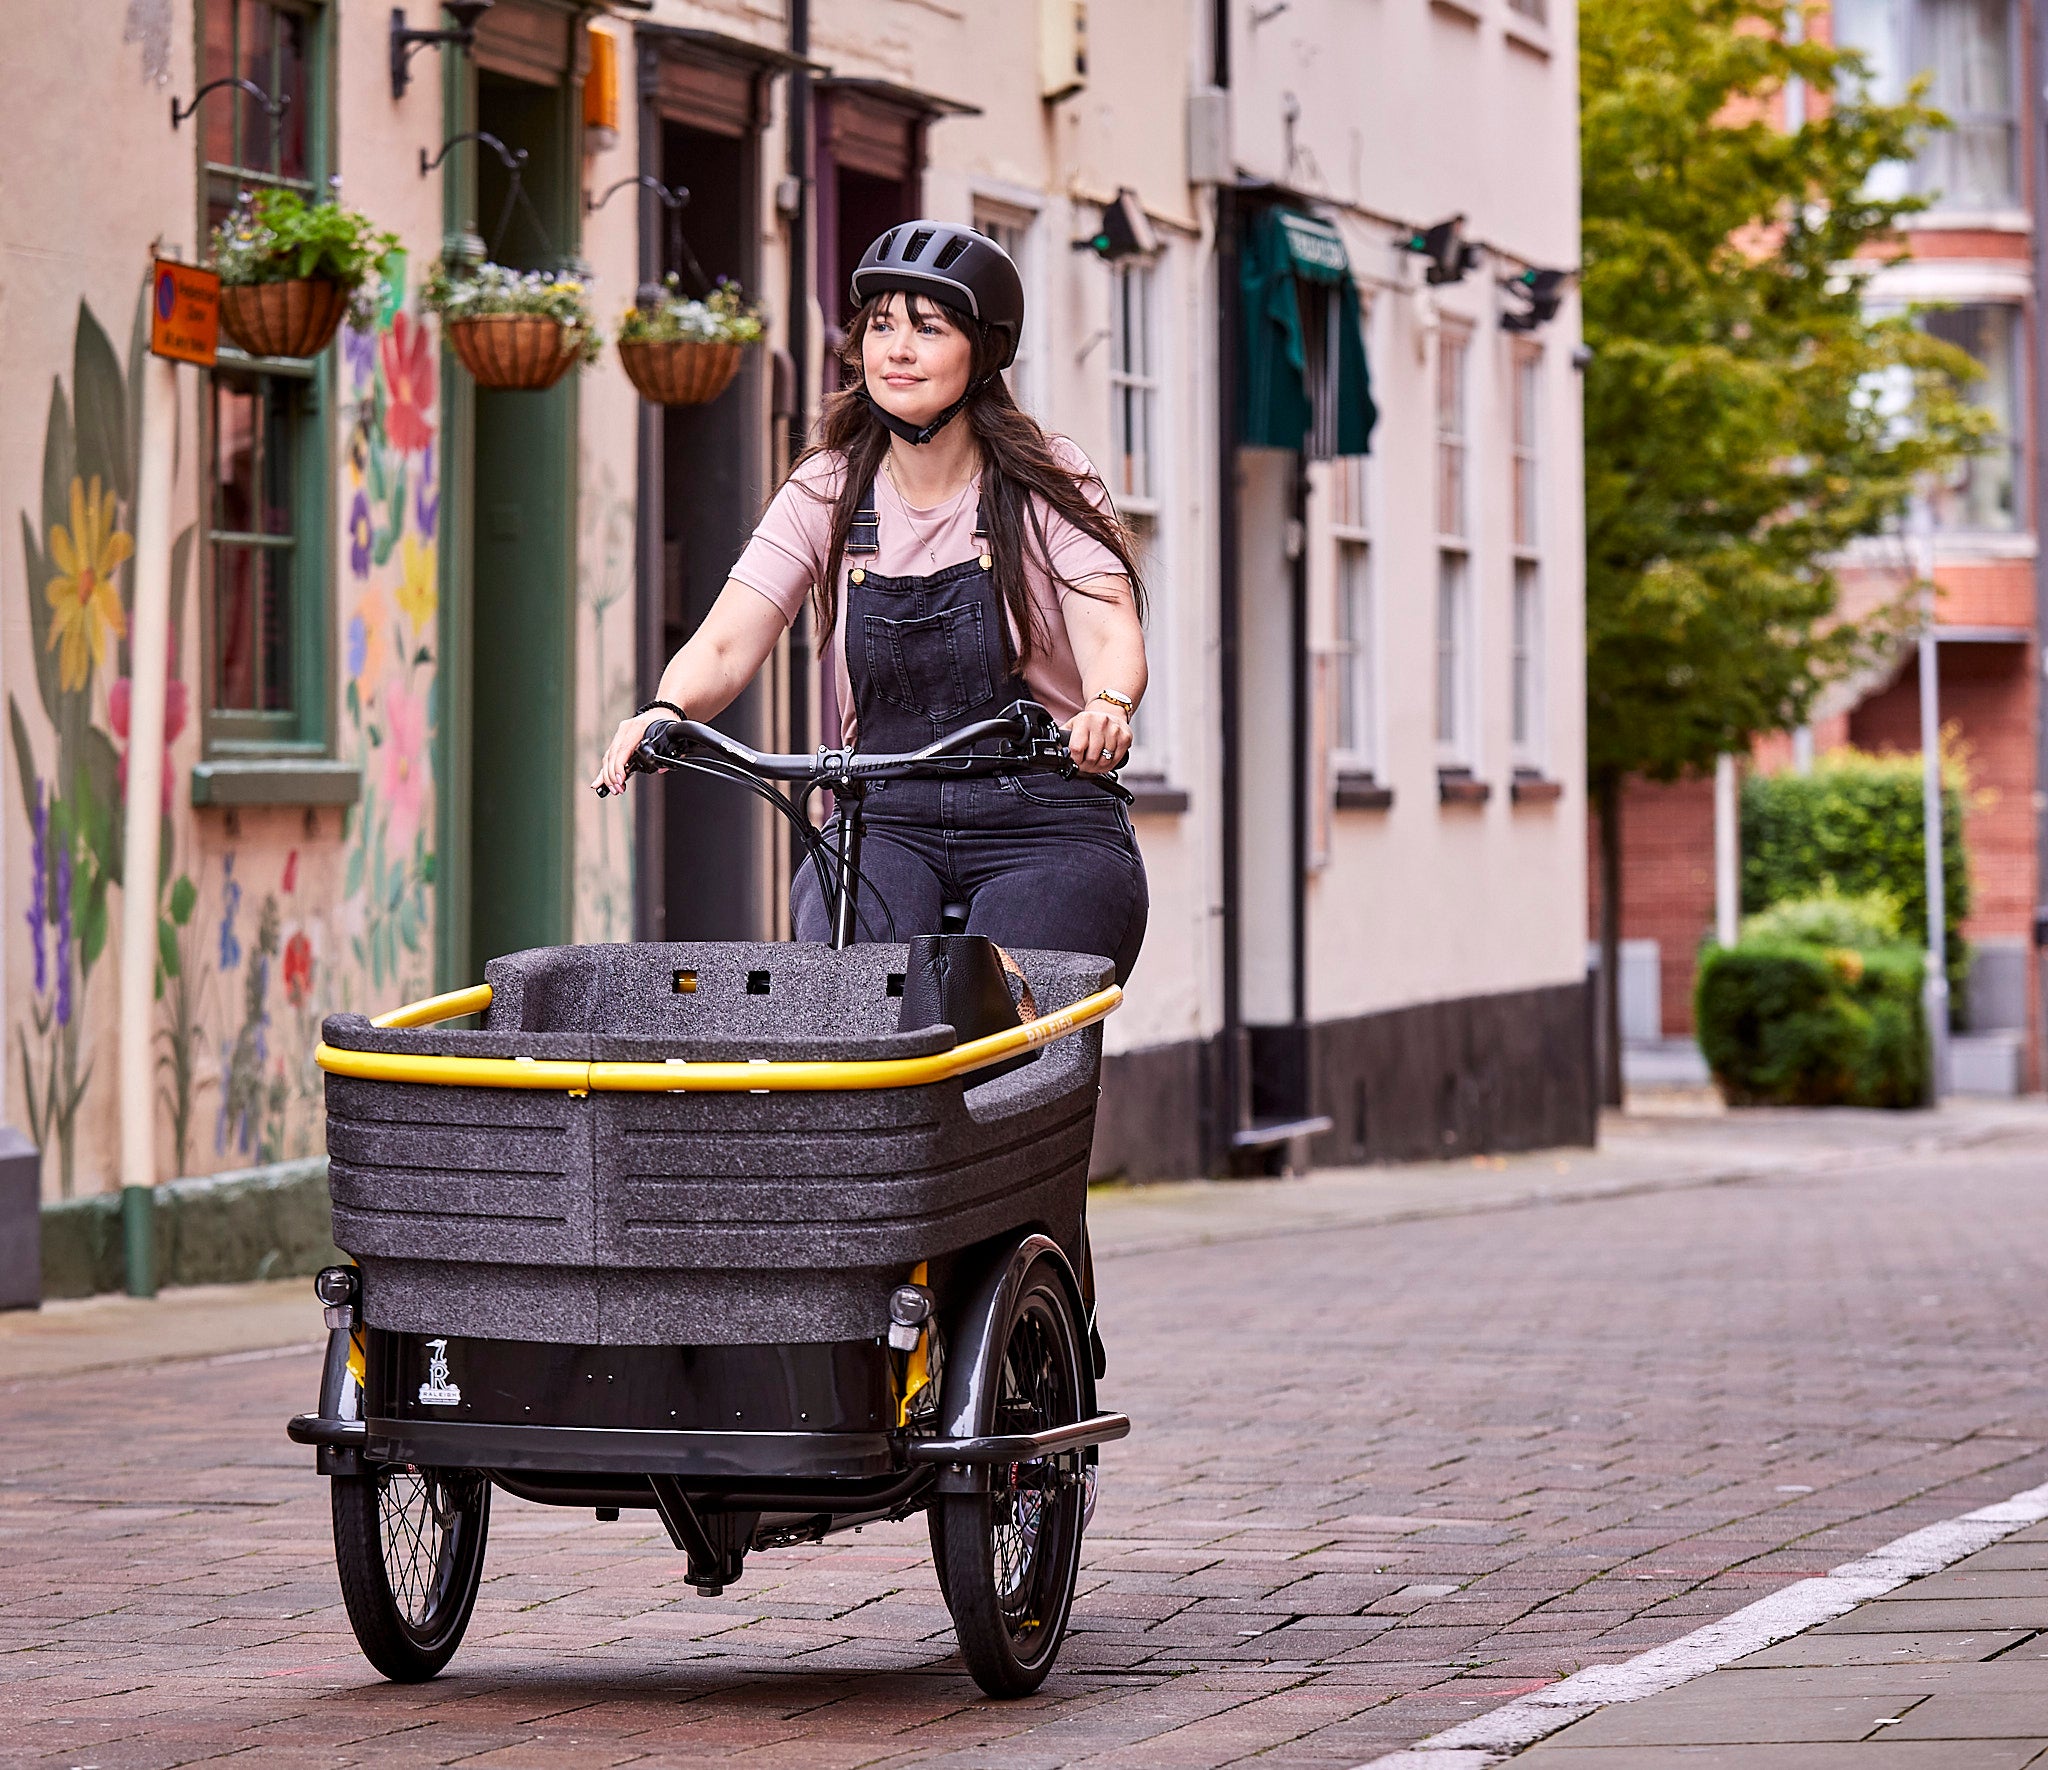 Raleigh’s Stride 3 e-cargo bike resembles the cargo cycles that were once common